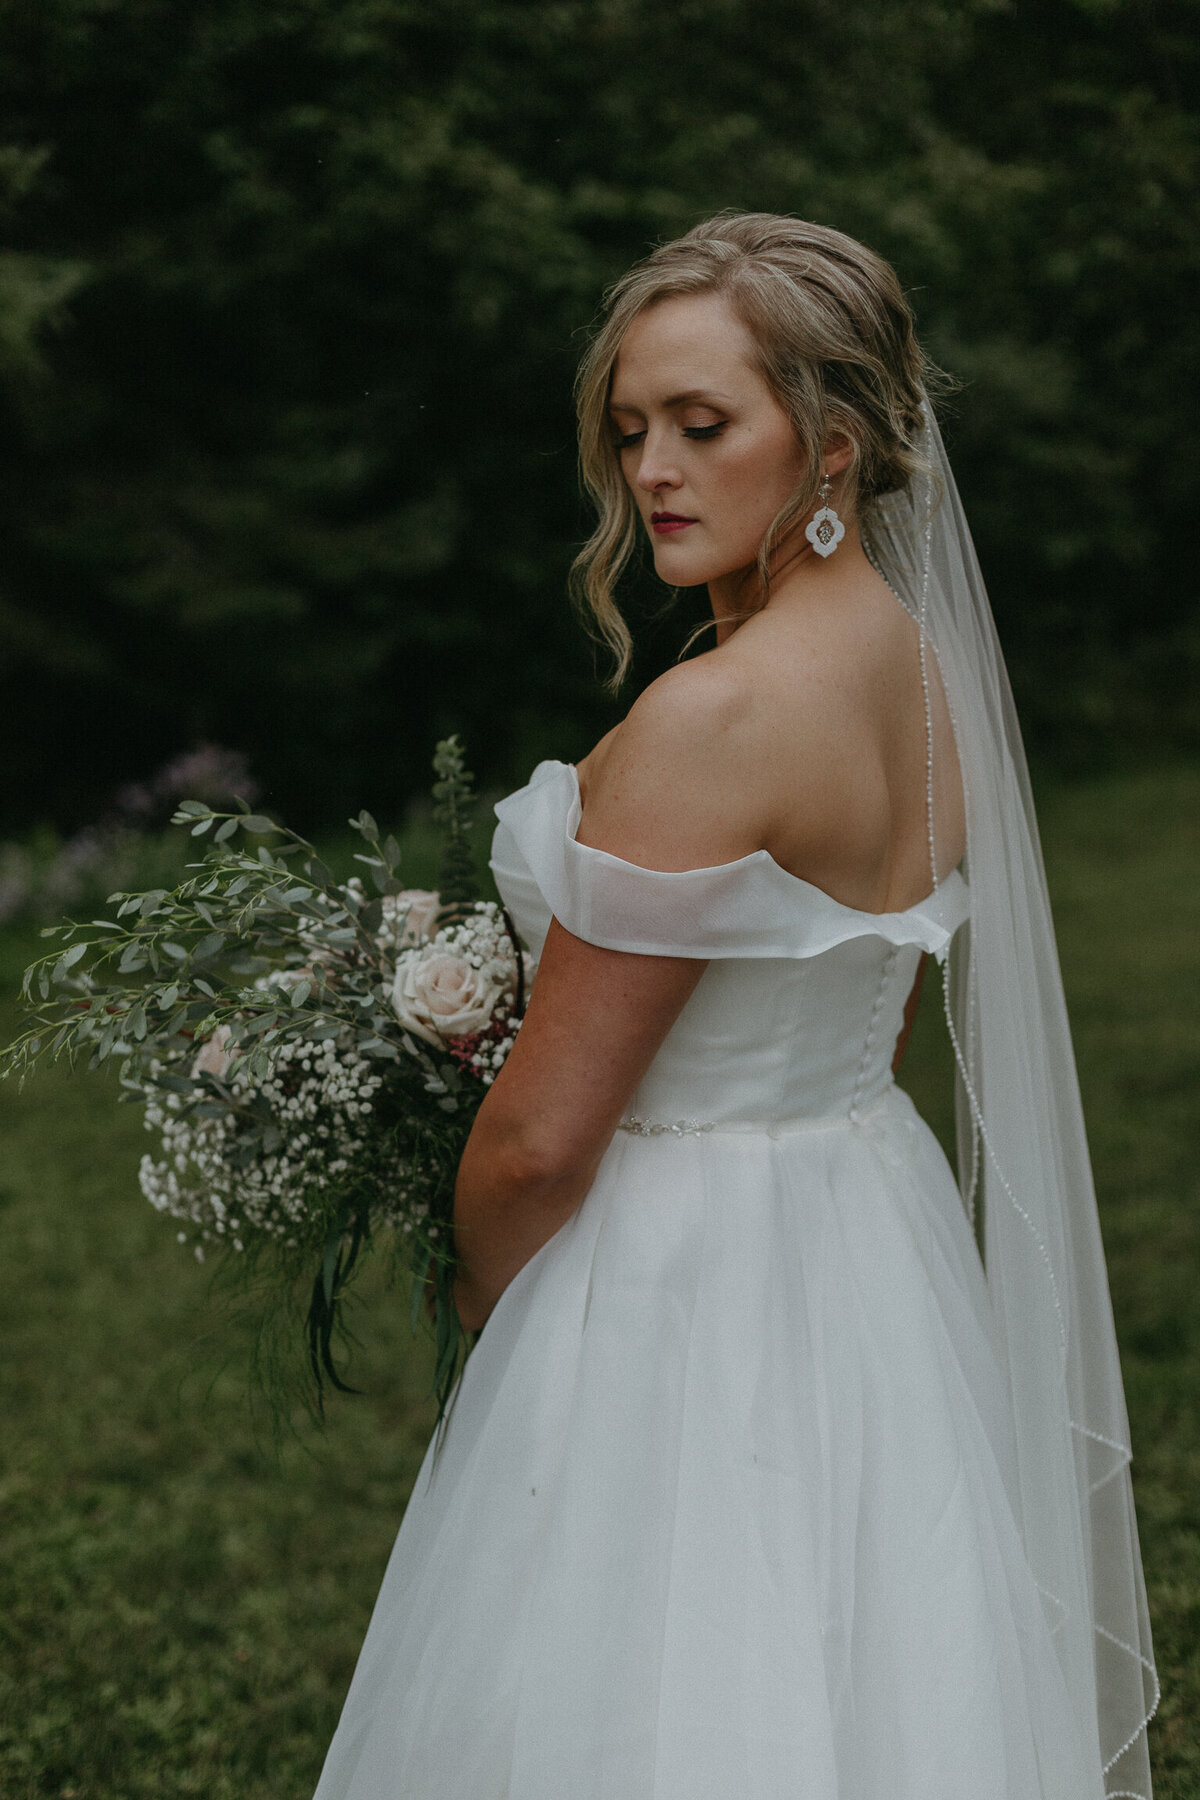 Bride portraits and wedding dress in wedding photos at Adelina Barn in Gatineau Quebec